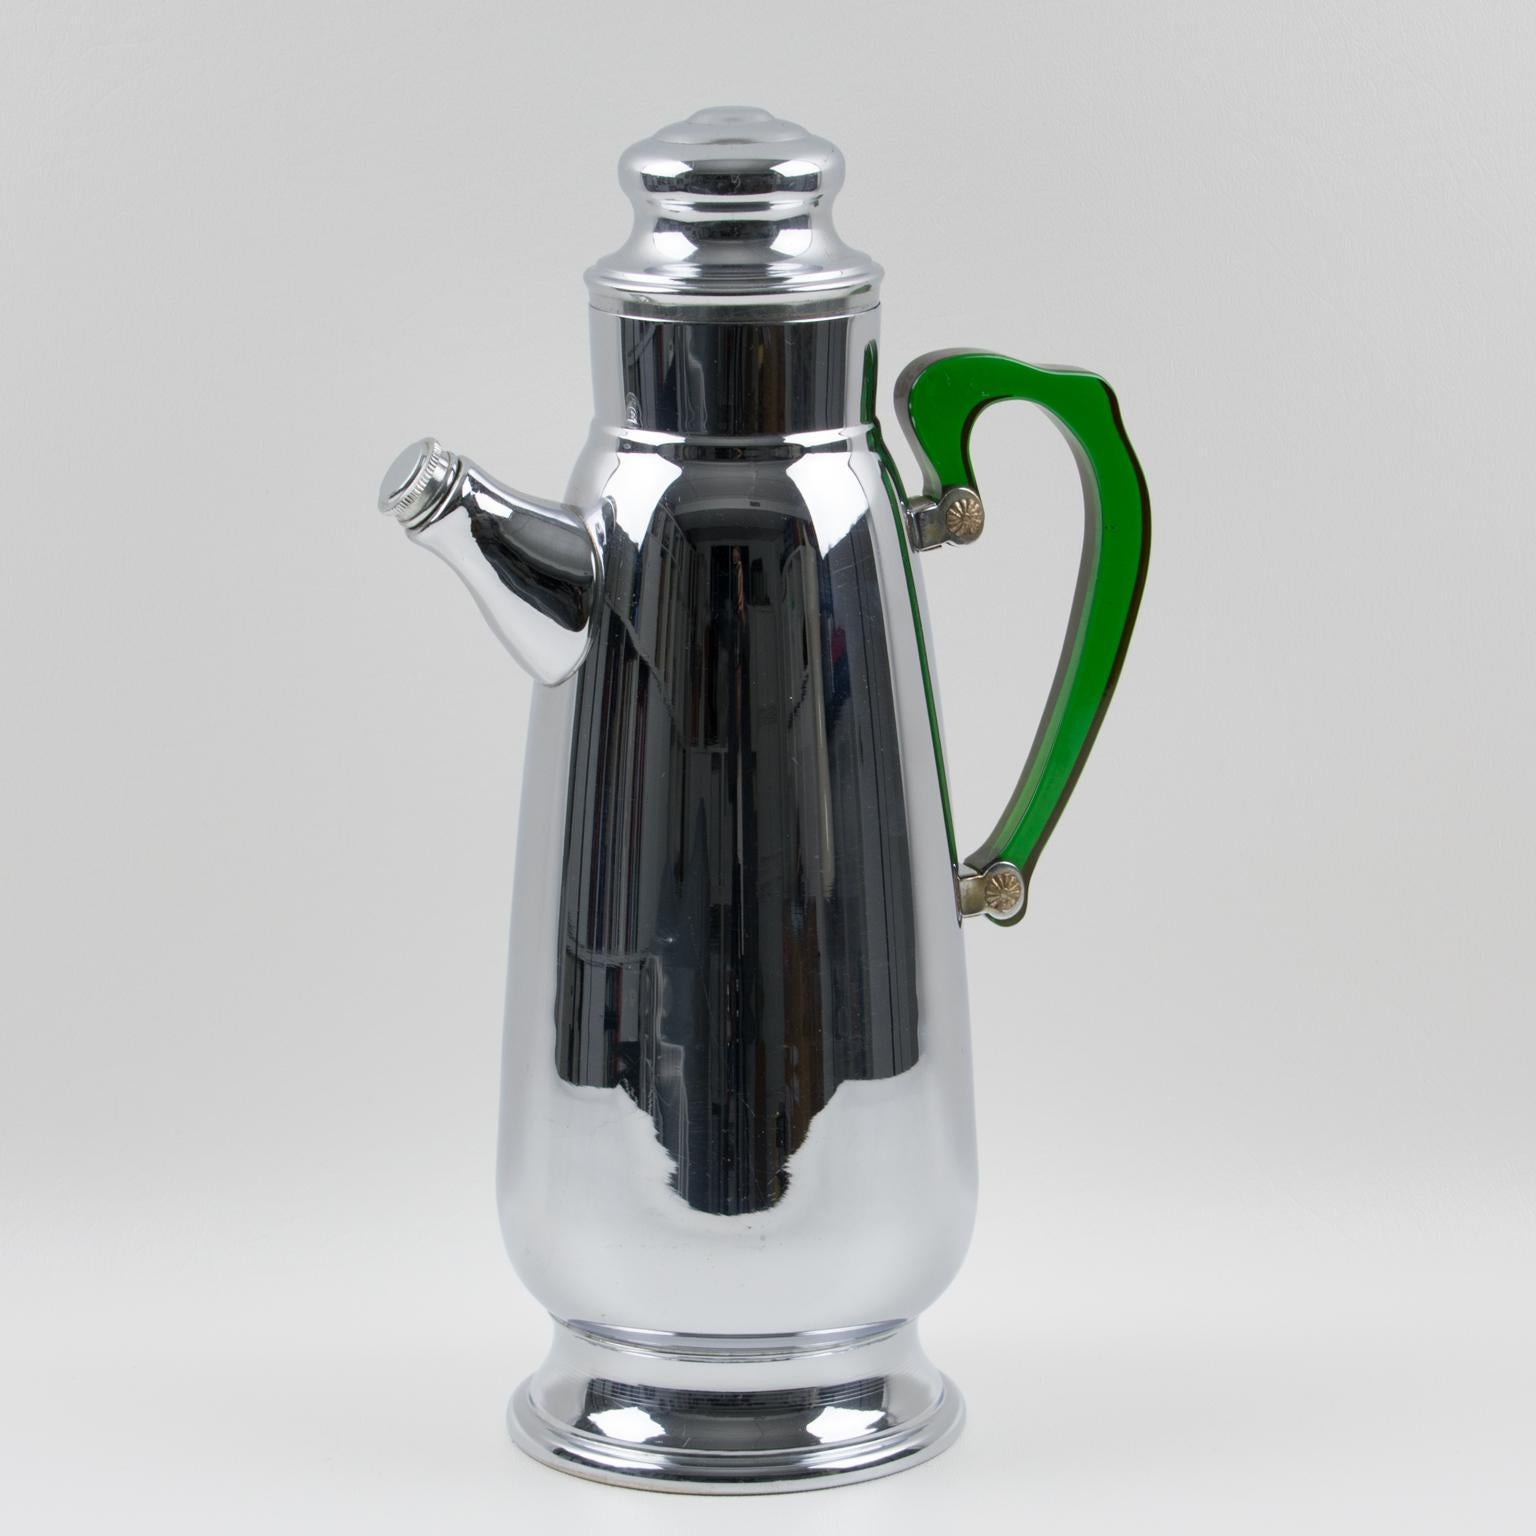 Lovely Art Deco polished chrome stainless cocktail or Martini Shaker with green Bakelite handle. Streamline Machine Age design with rare transparent green Bakelite handle (Prystal quality). The Bakelite handle on the Shaker remains sturdy with no